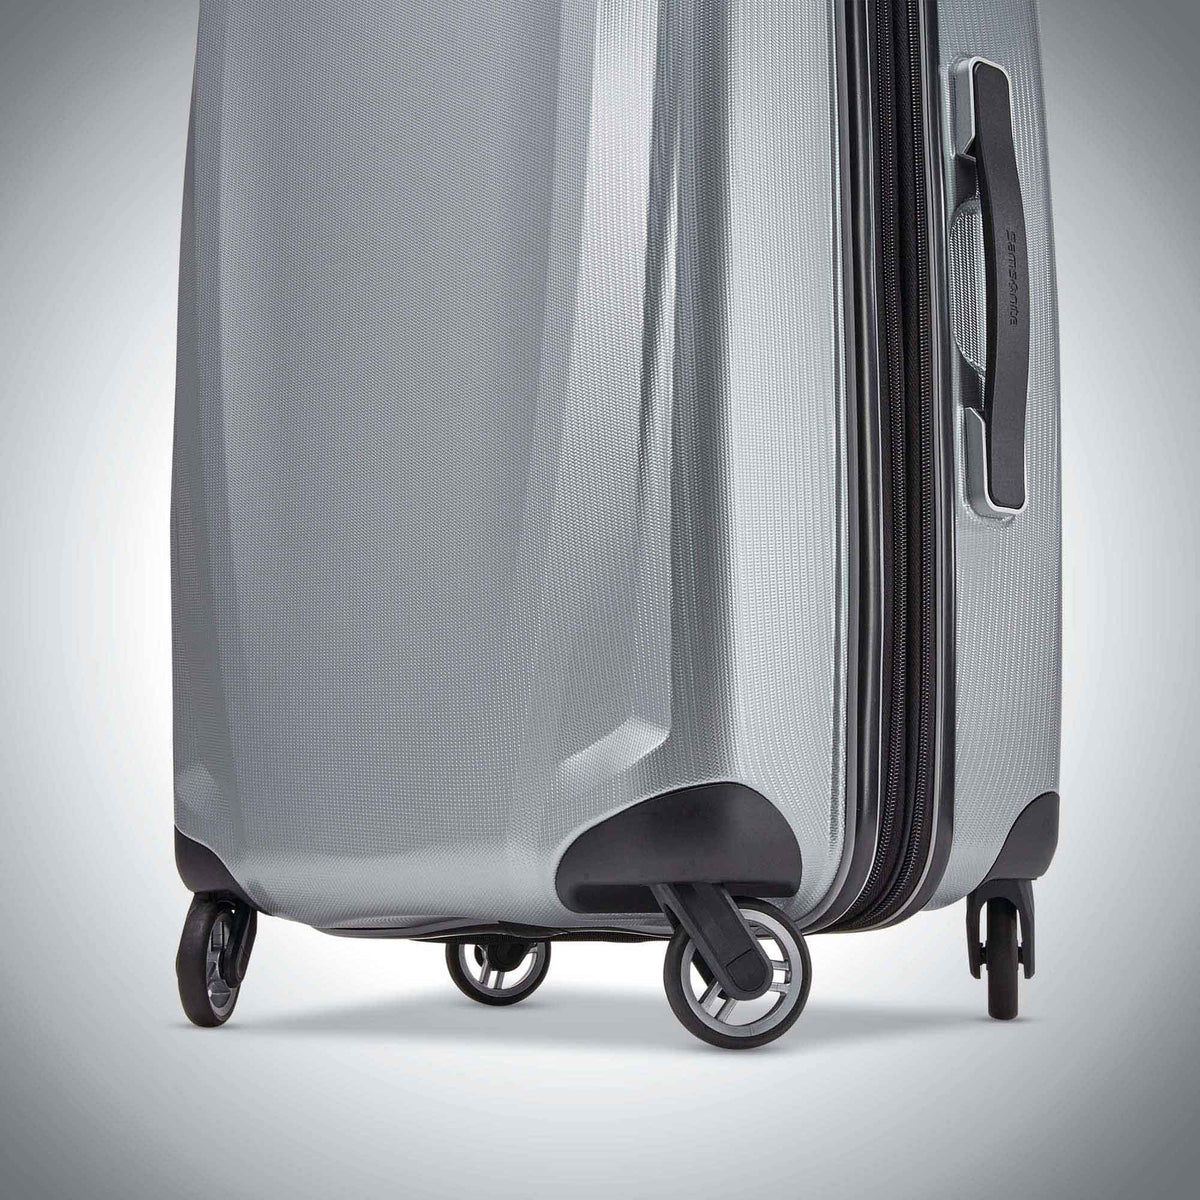 Samsonite 56"- 20" Winfield 3 Deluxe Carry-On Spinner Luggage